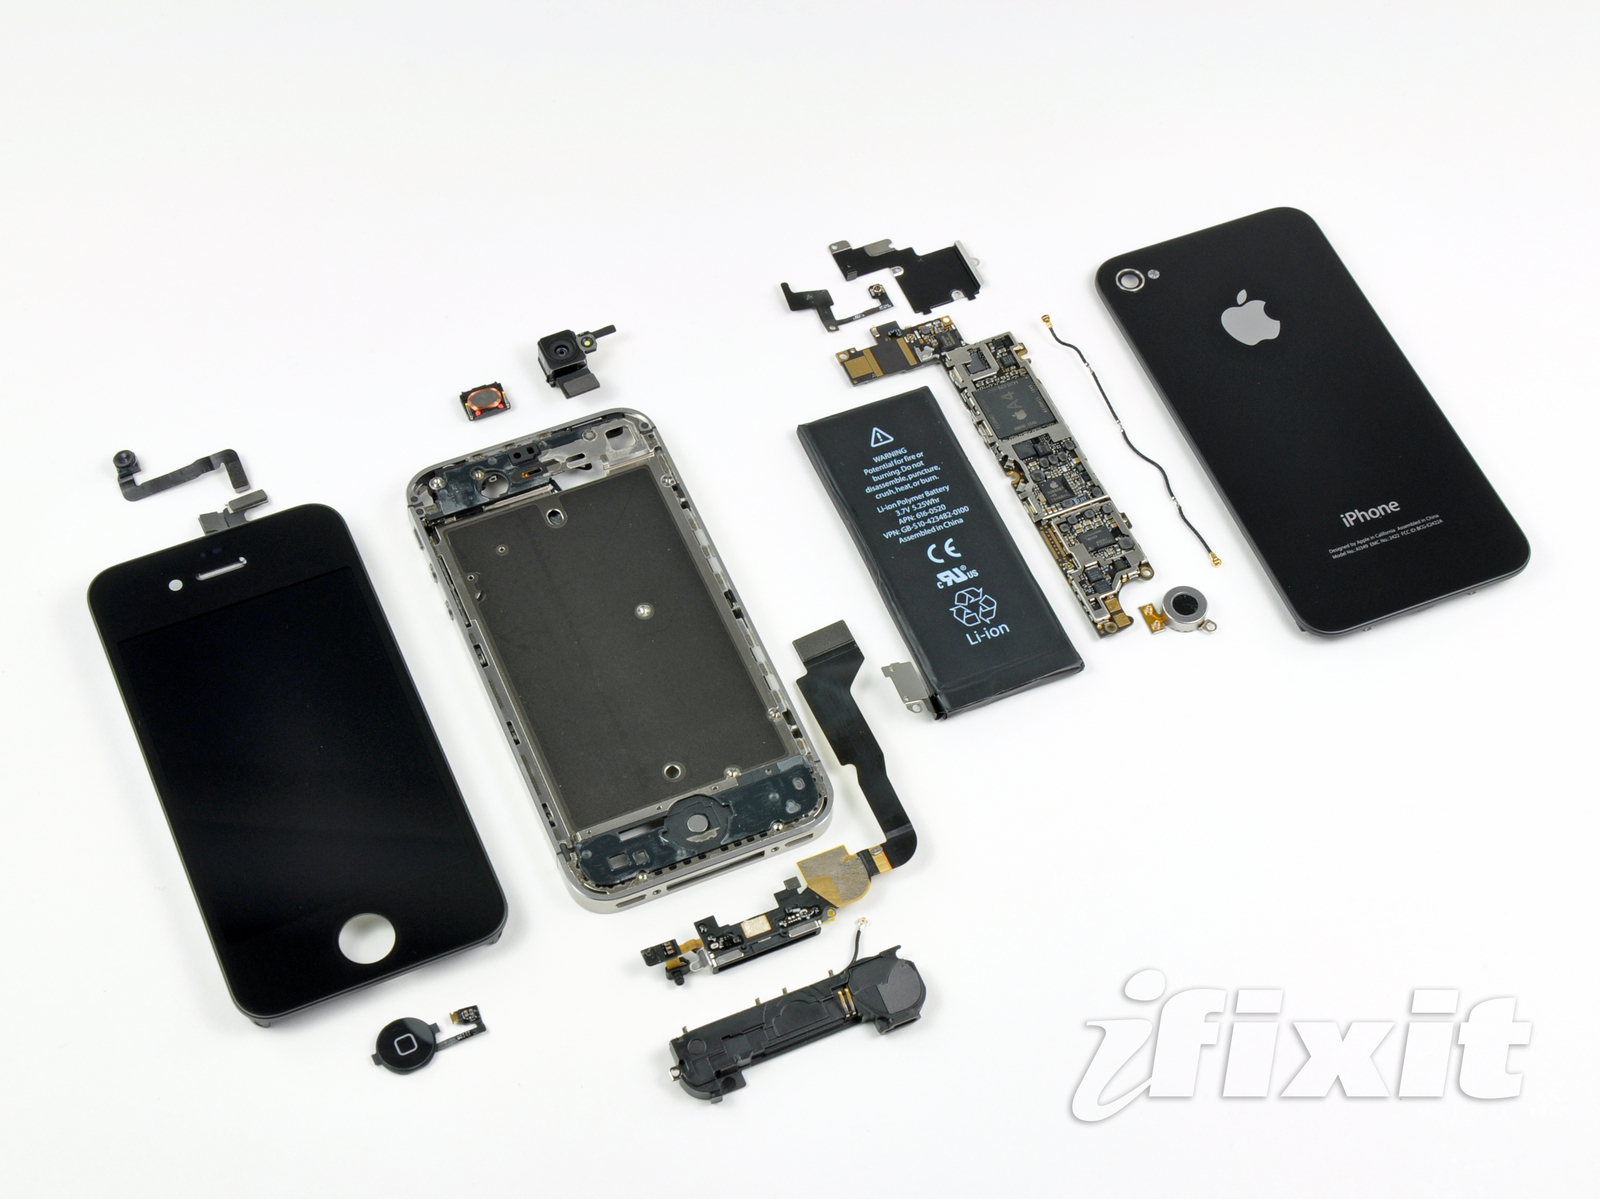 Iphone 4G Disassembly Ifixit